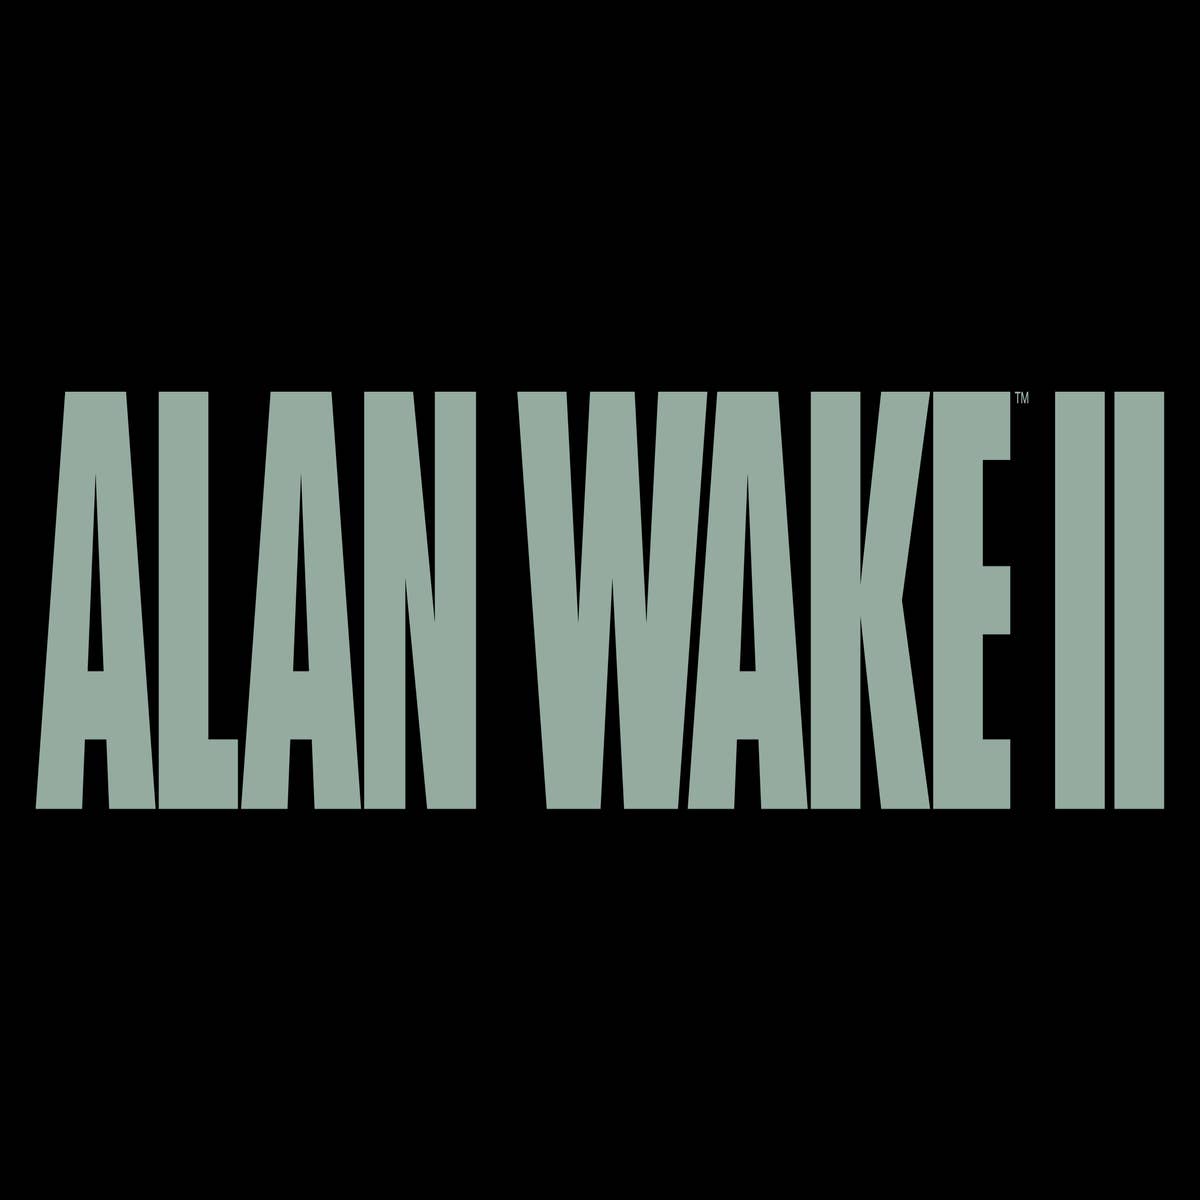 Oh No, I Don't Like Alan Wake II. Did fans wait thirteen years for